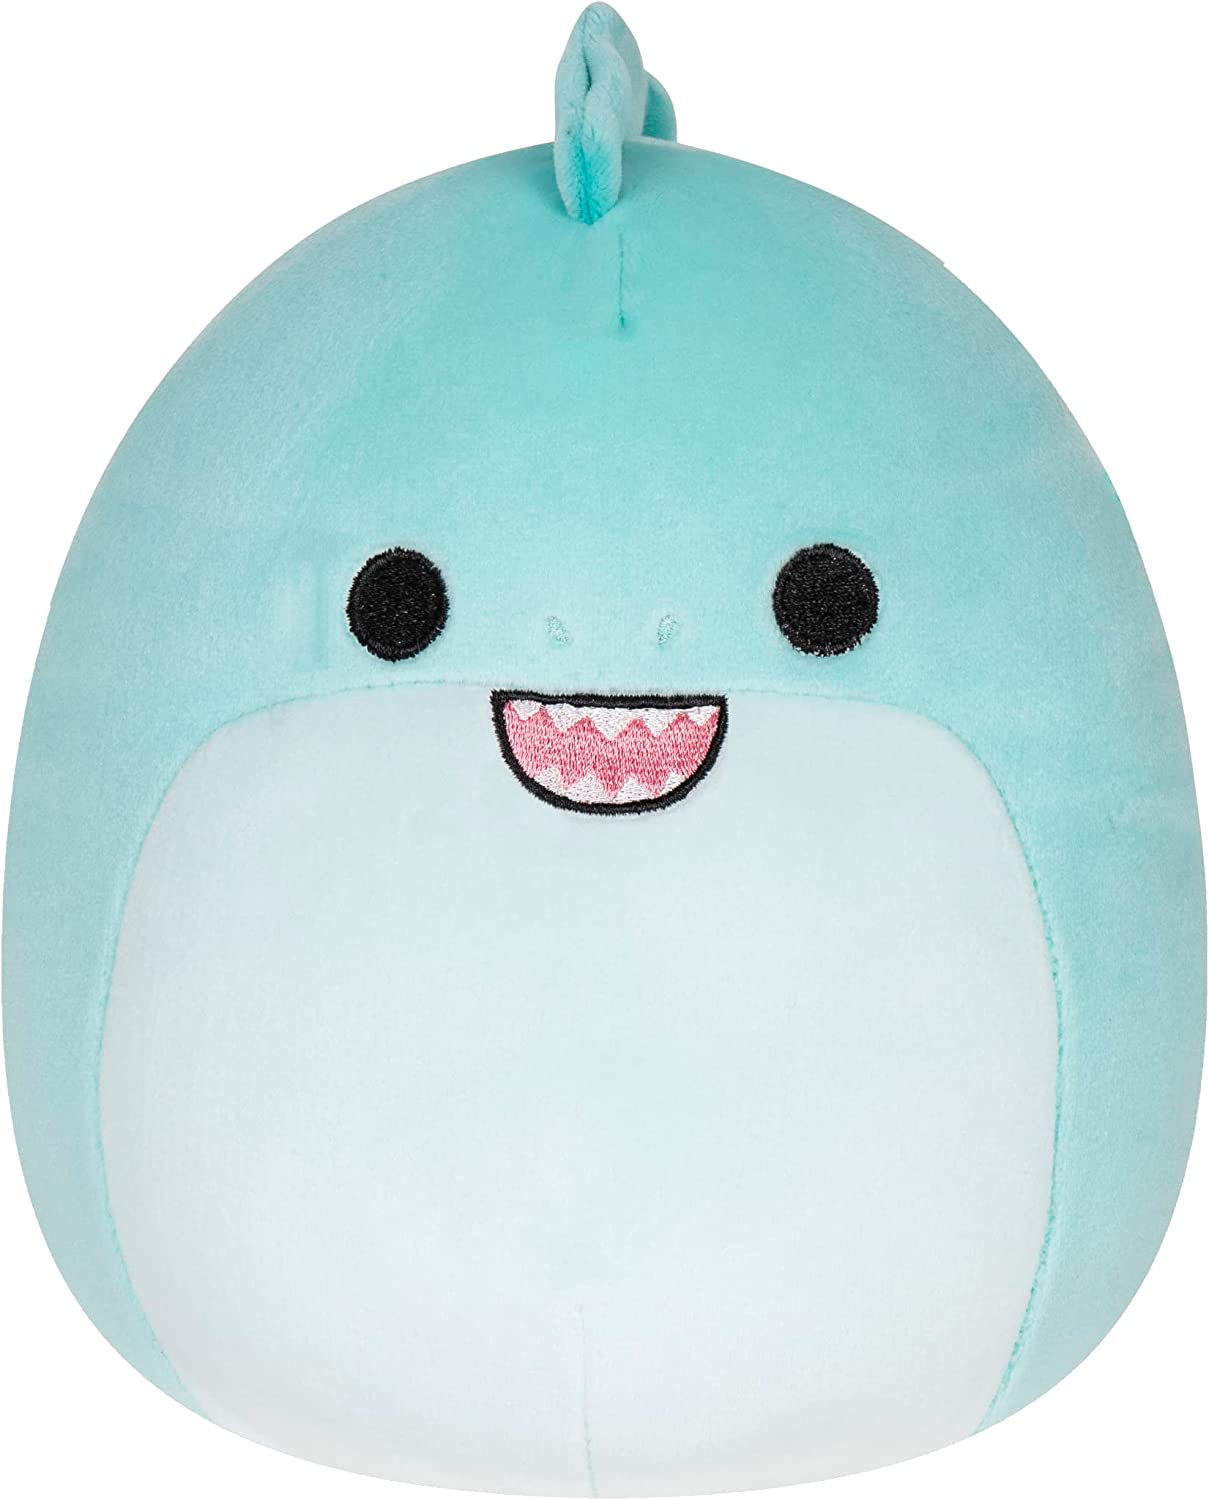 Squishmallows 7.5" Essy the Eel